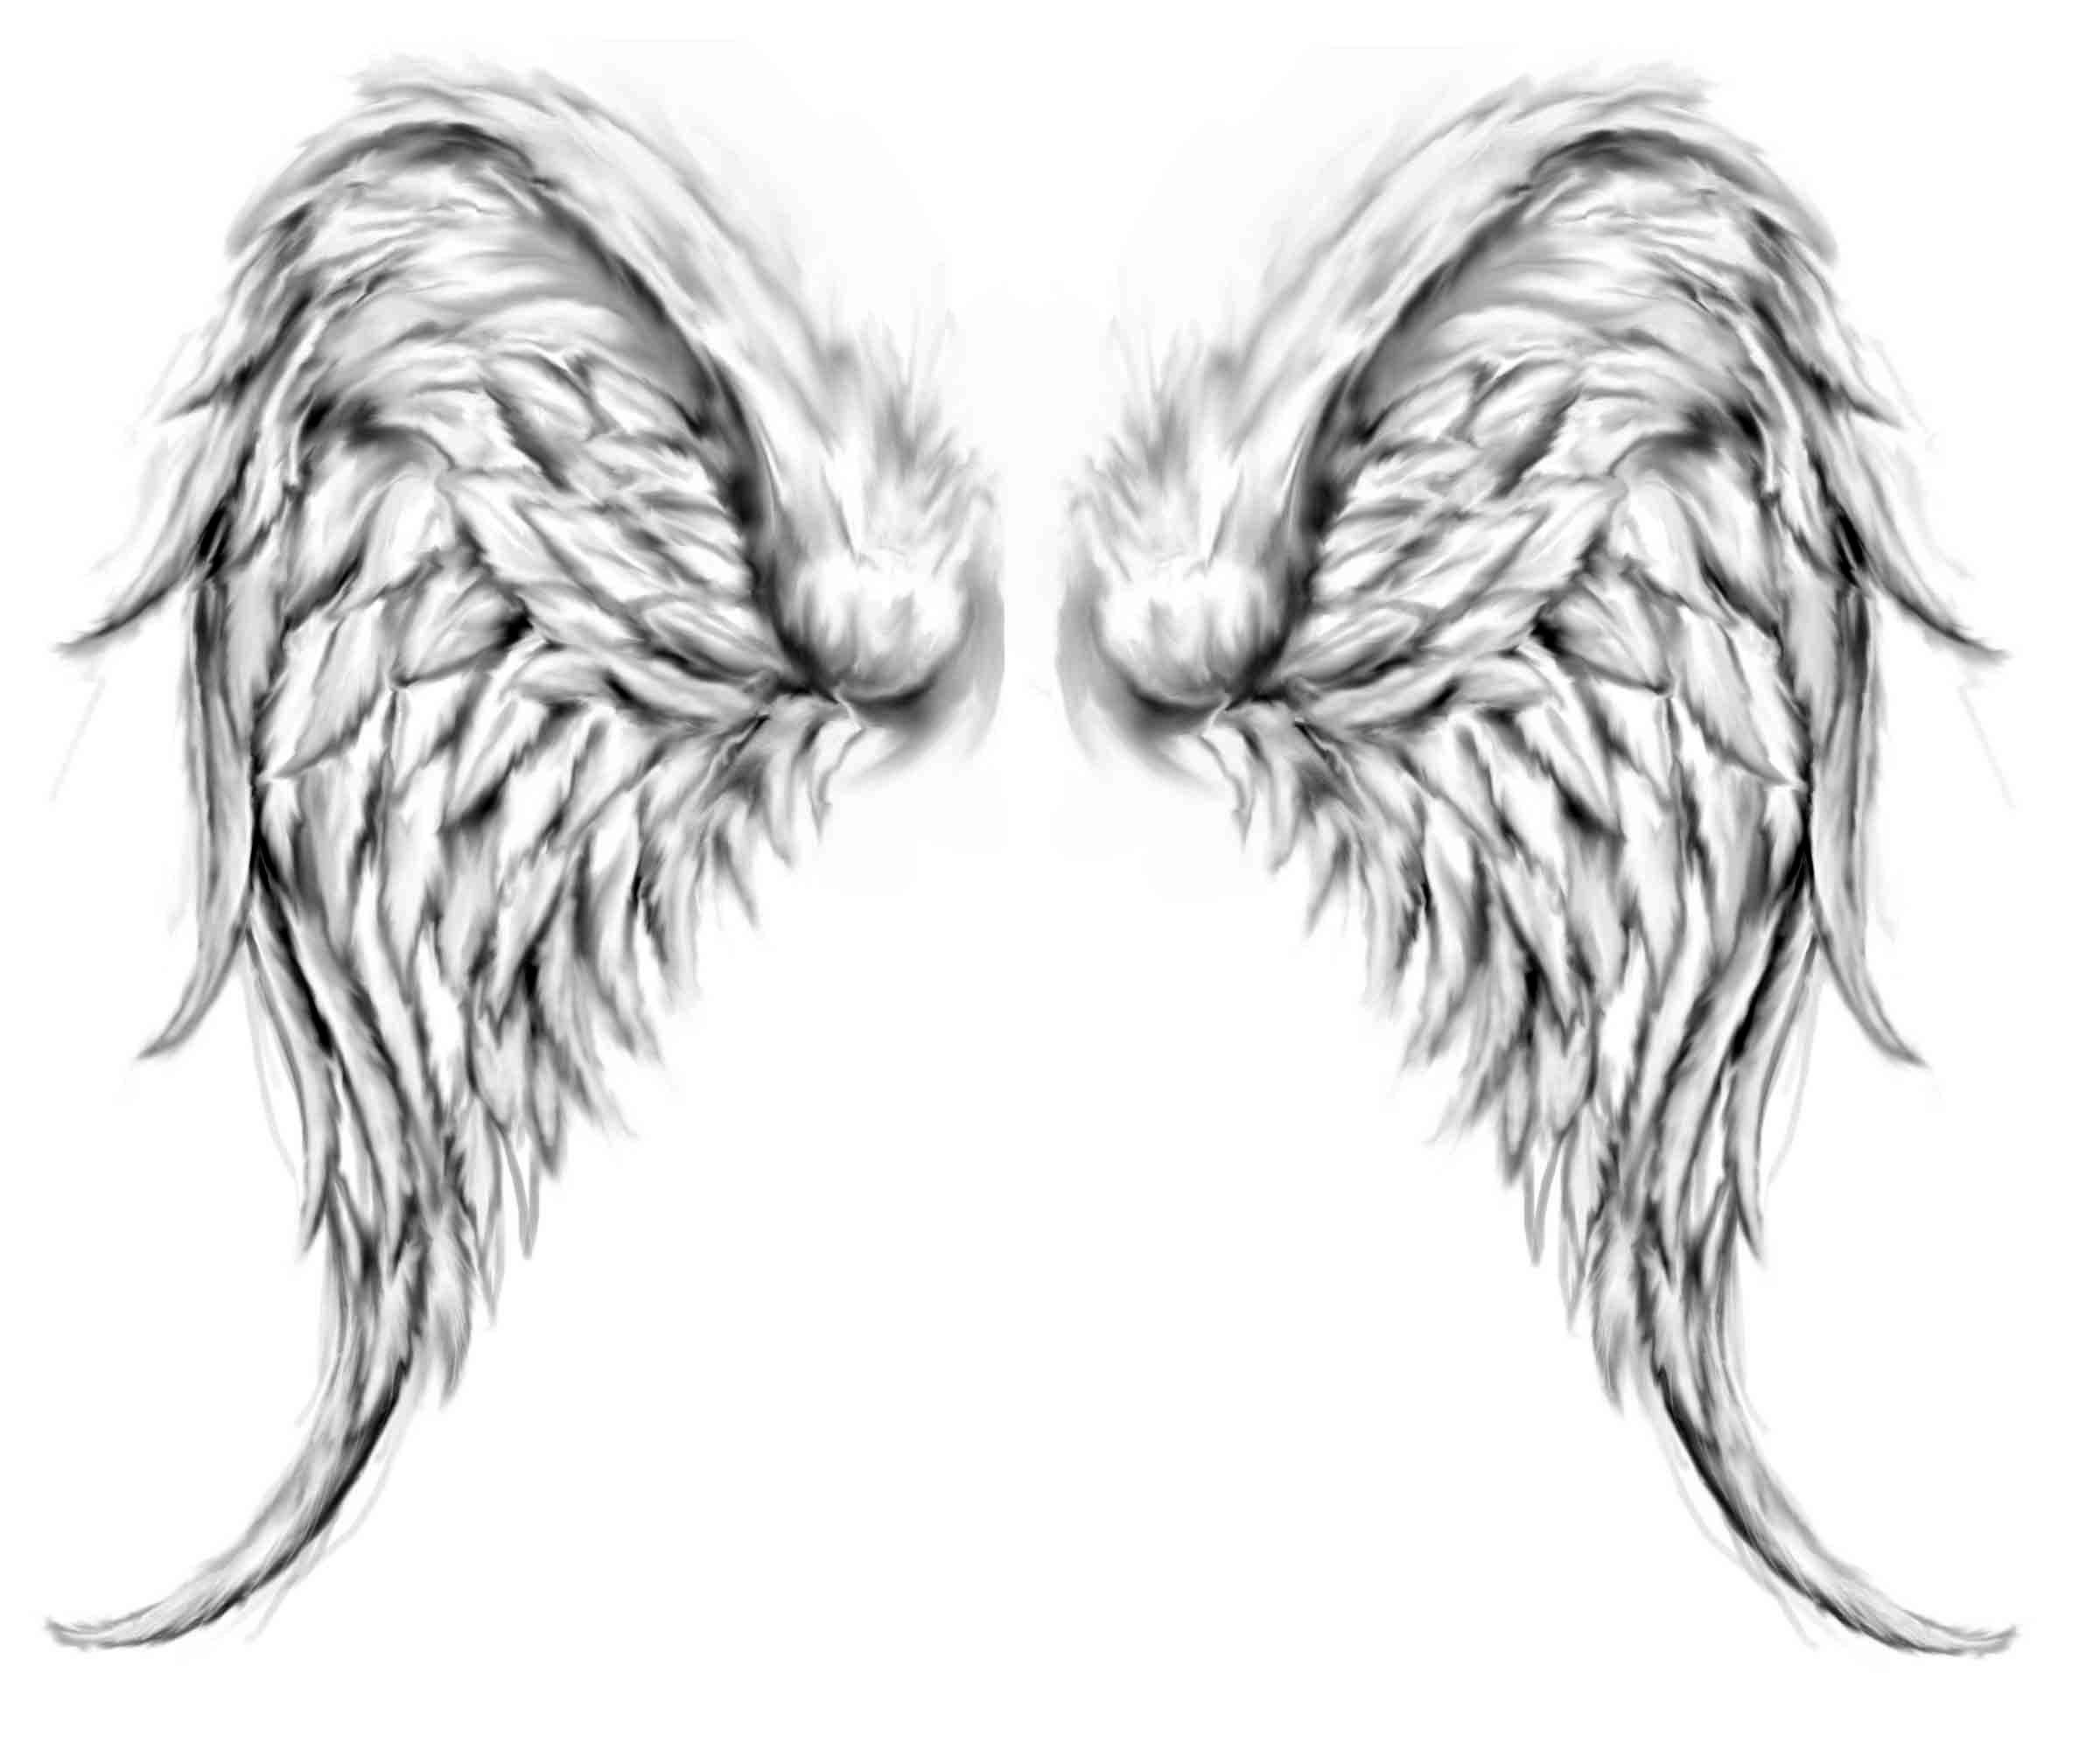 A pair of angel wings on a white background - Wings